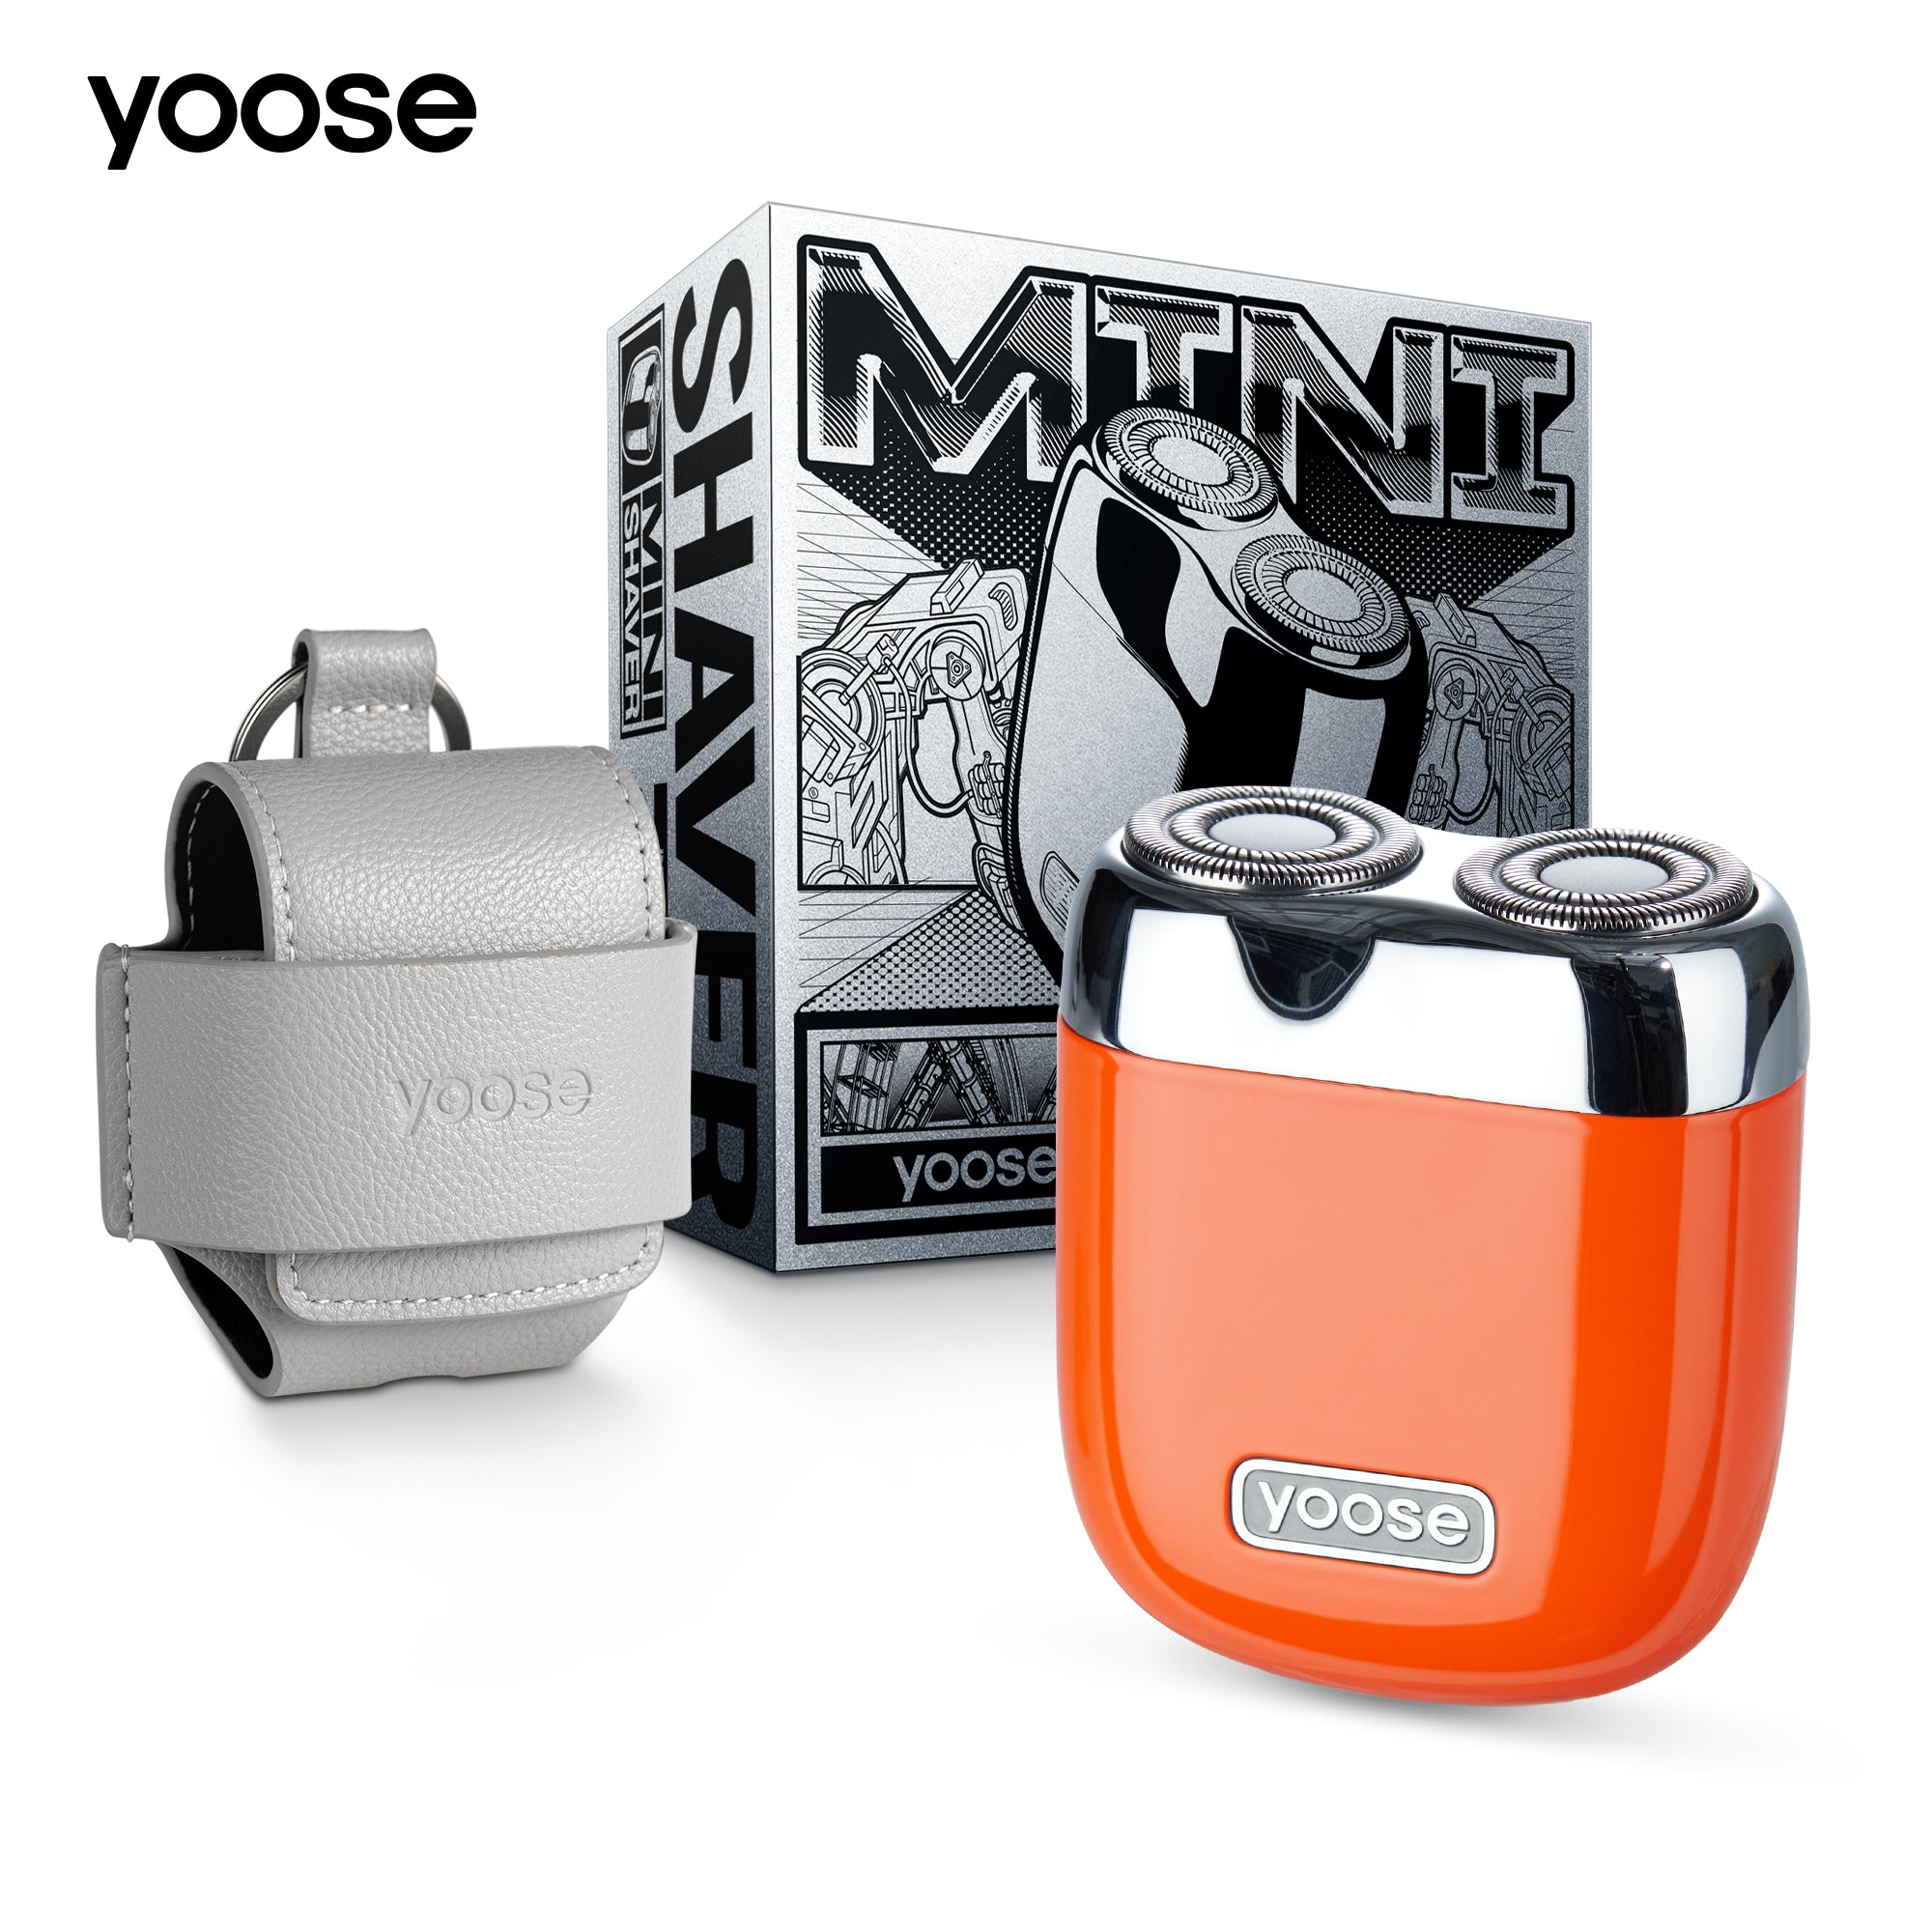 yoose MINI Rotary shaver-Alloy made-German Imported & Extra replacement head